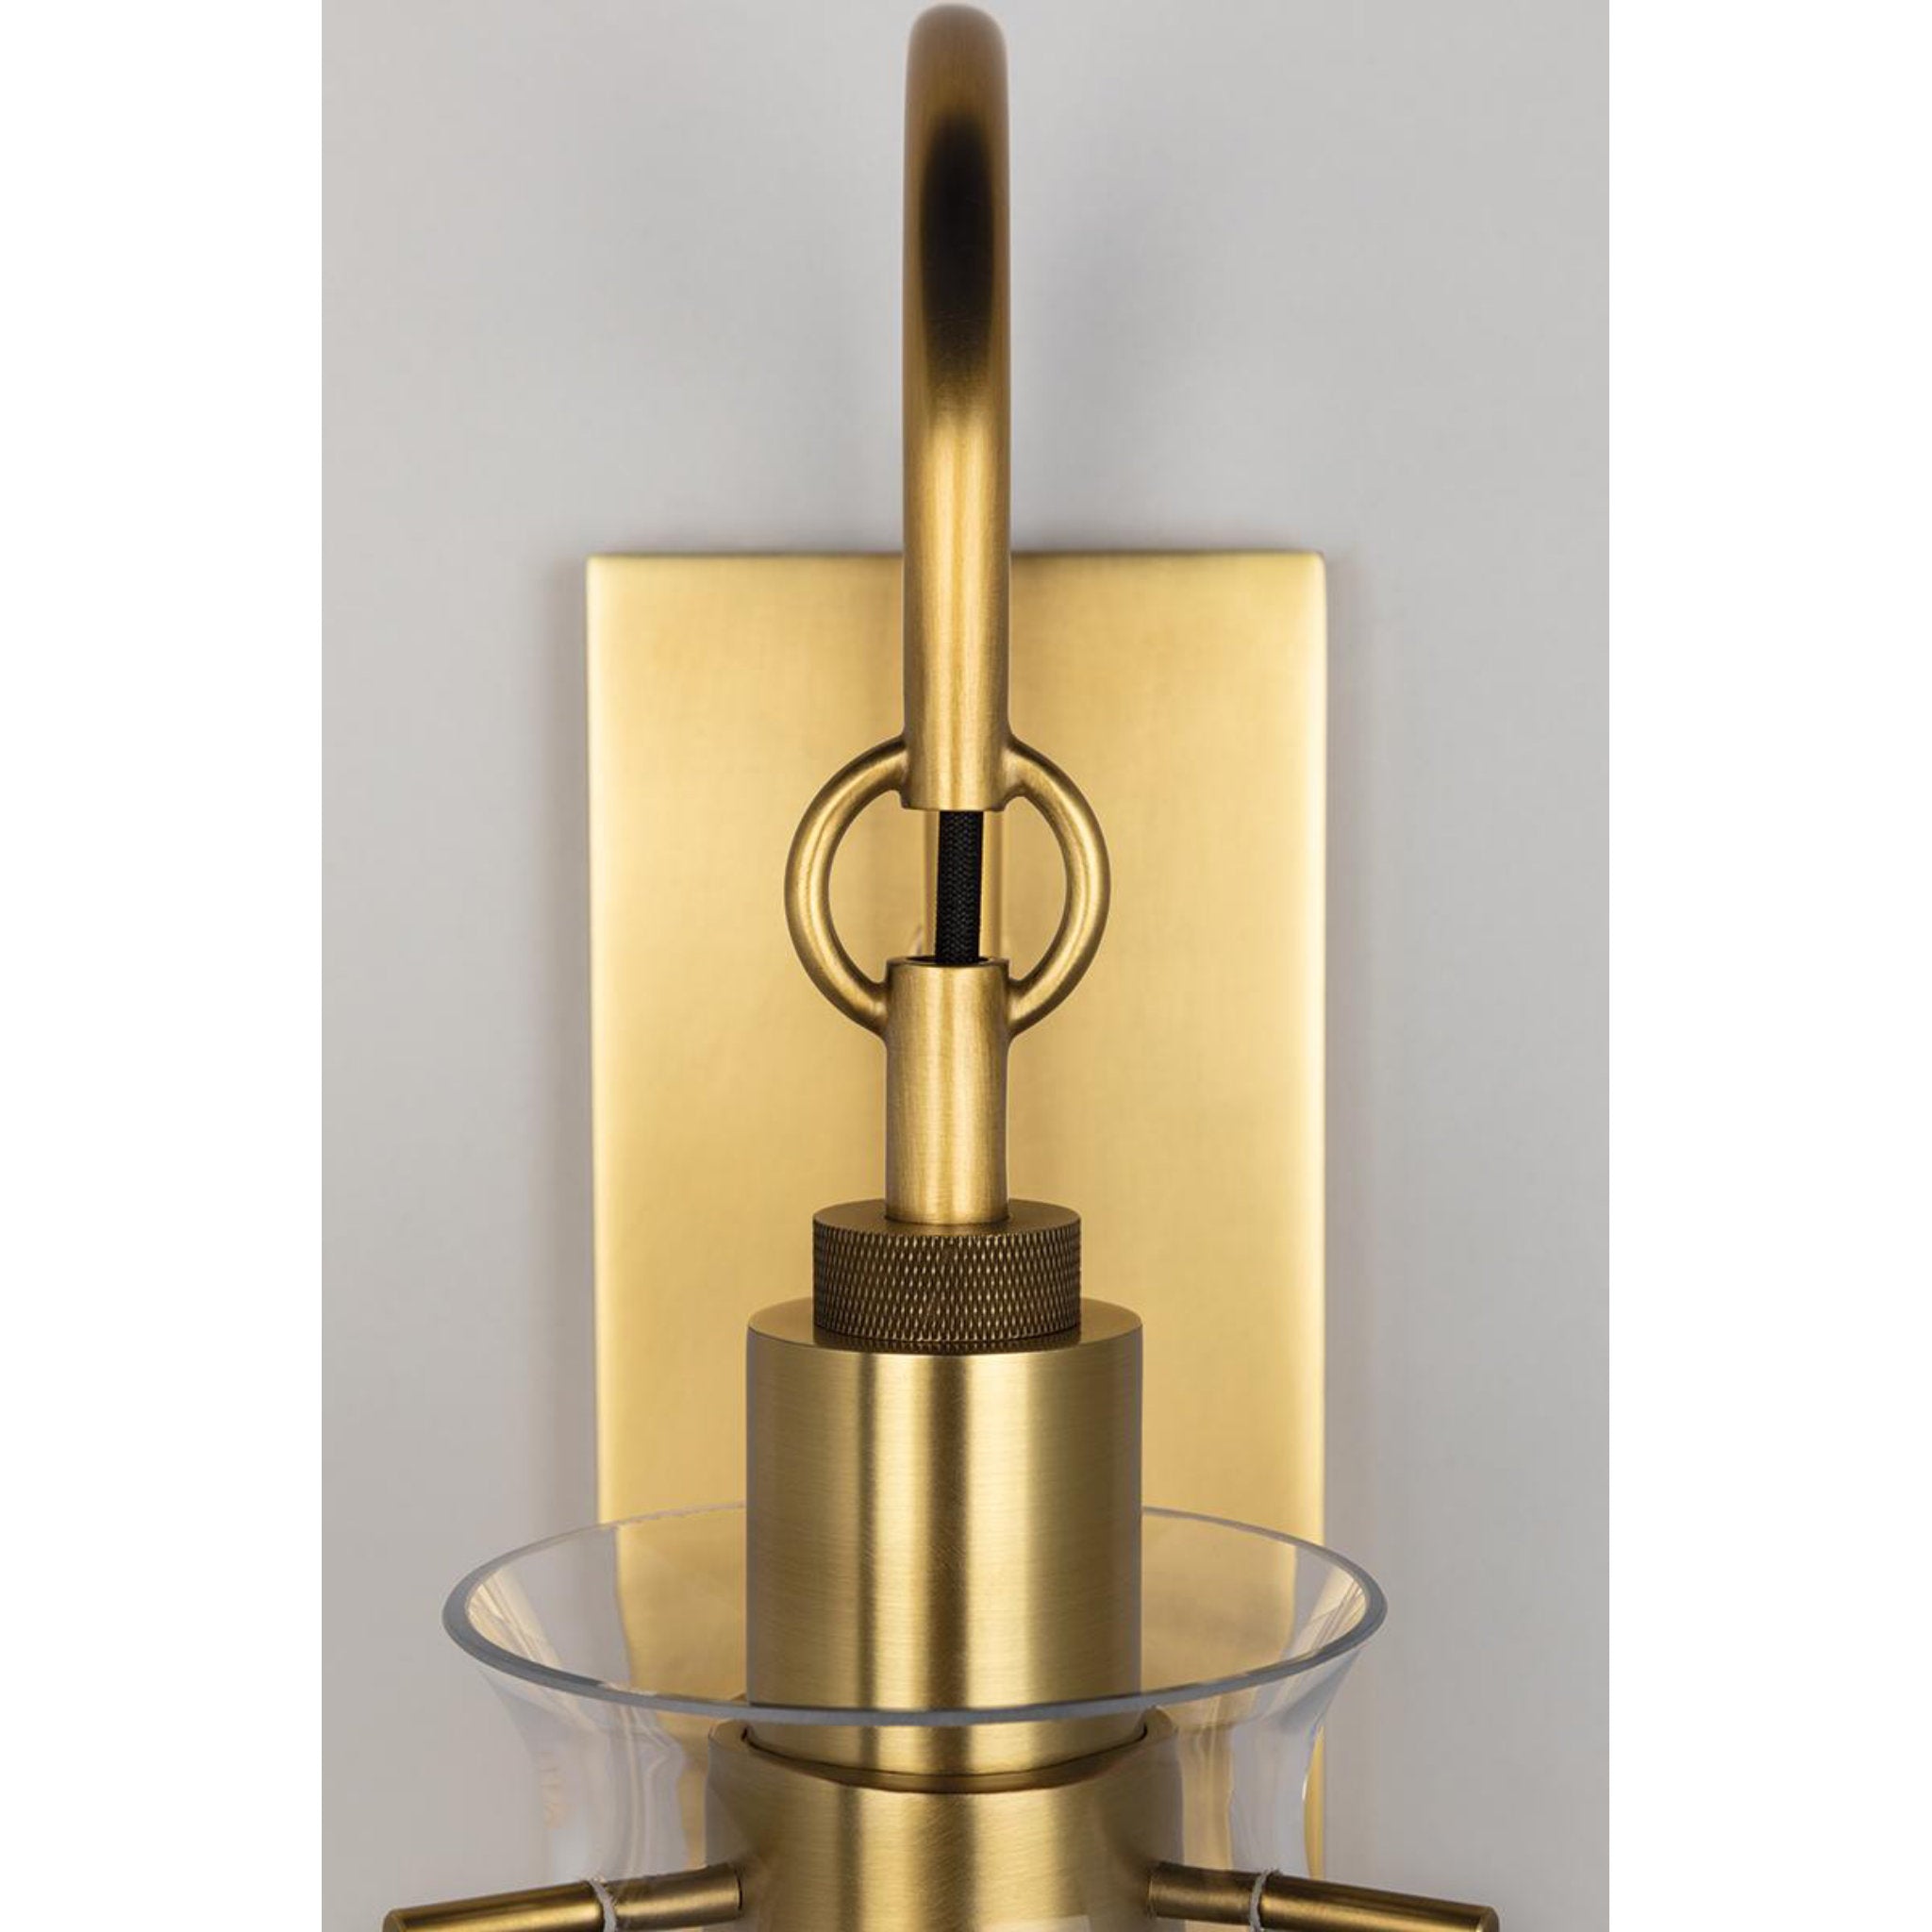 Ivy 1 Light Wall Sconce in Old Bronze by Becki Owens